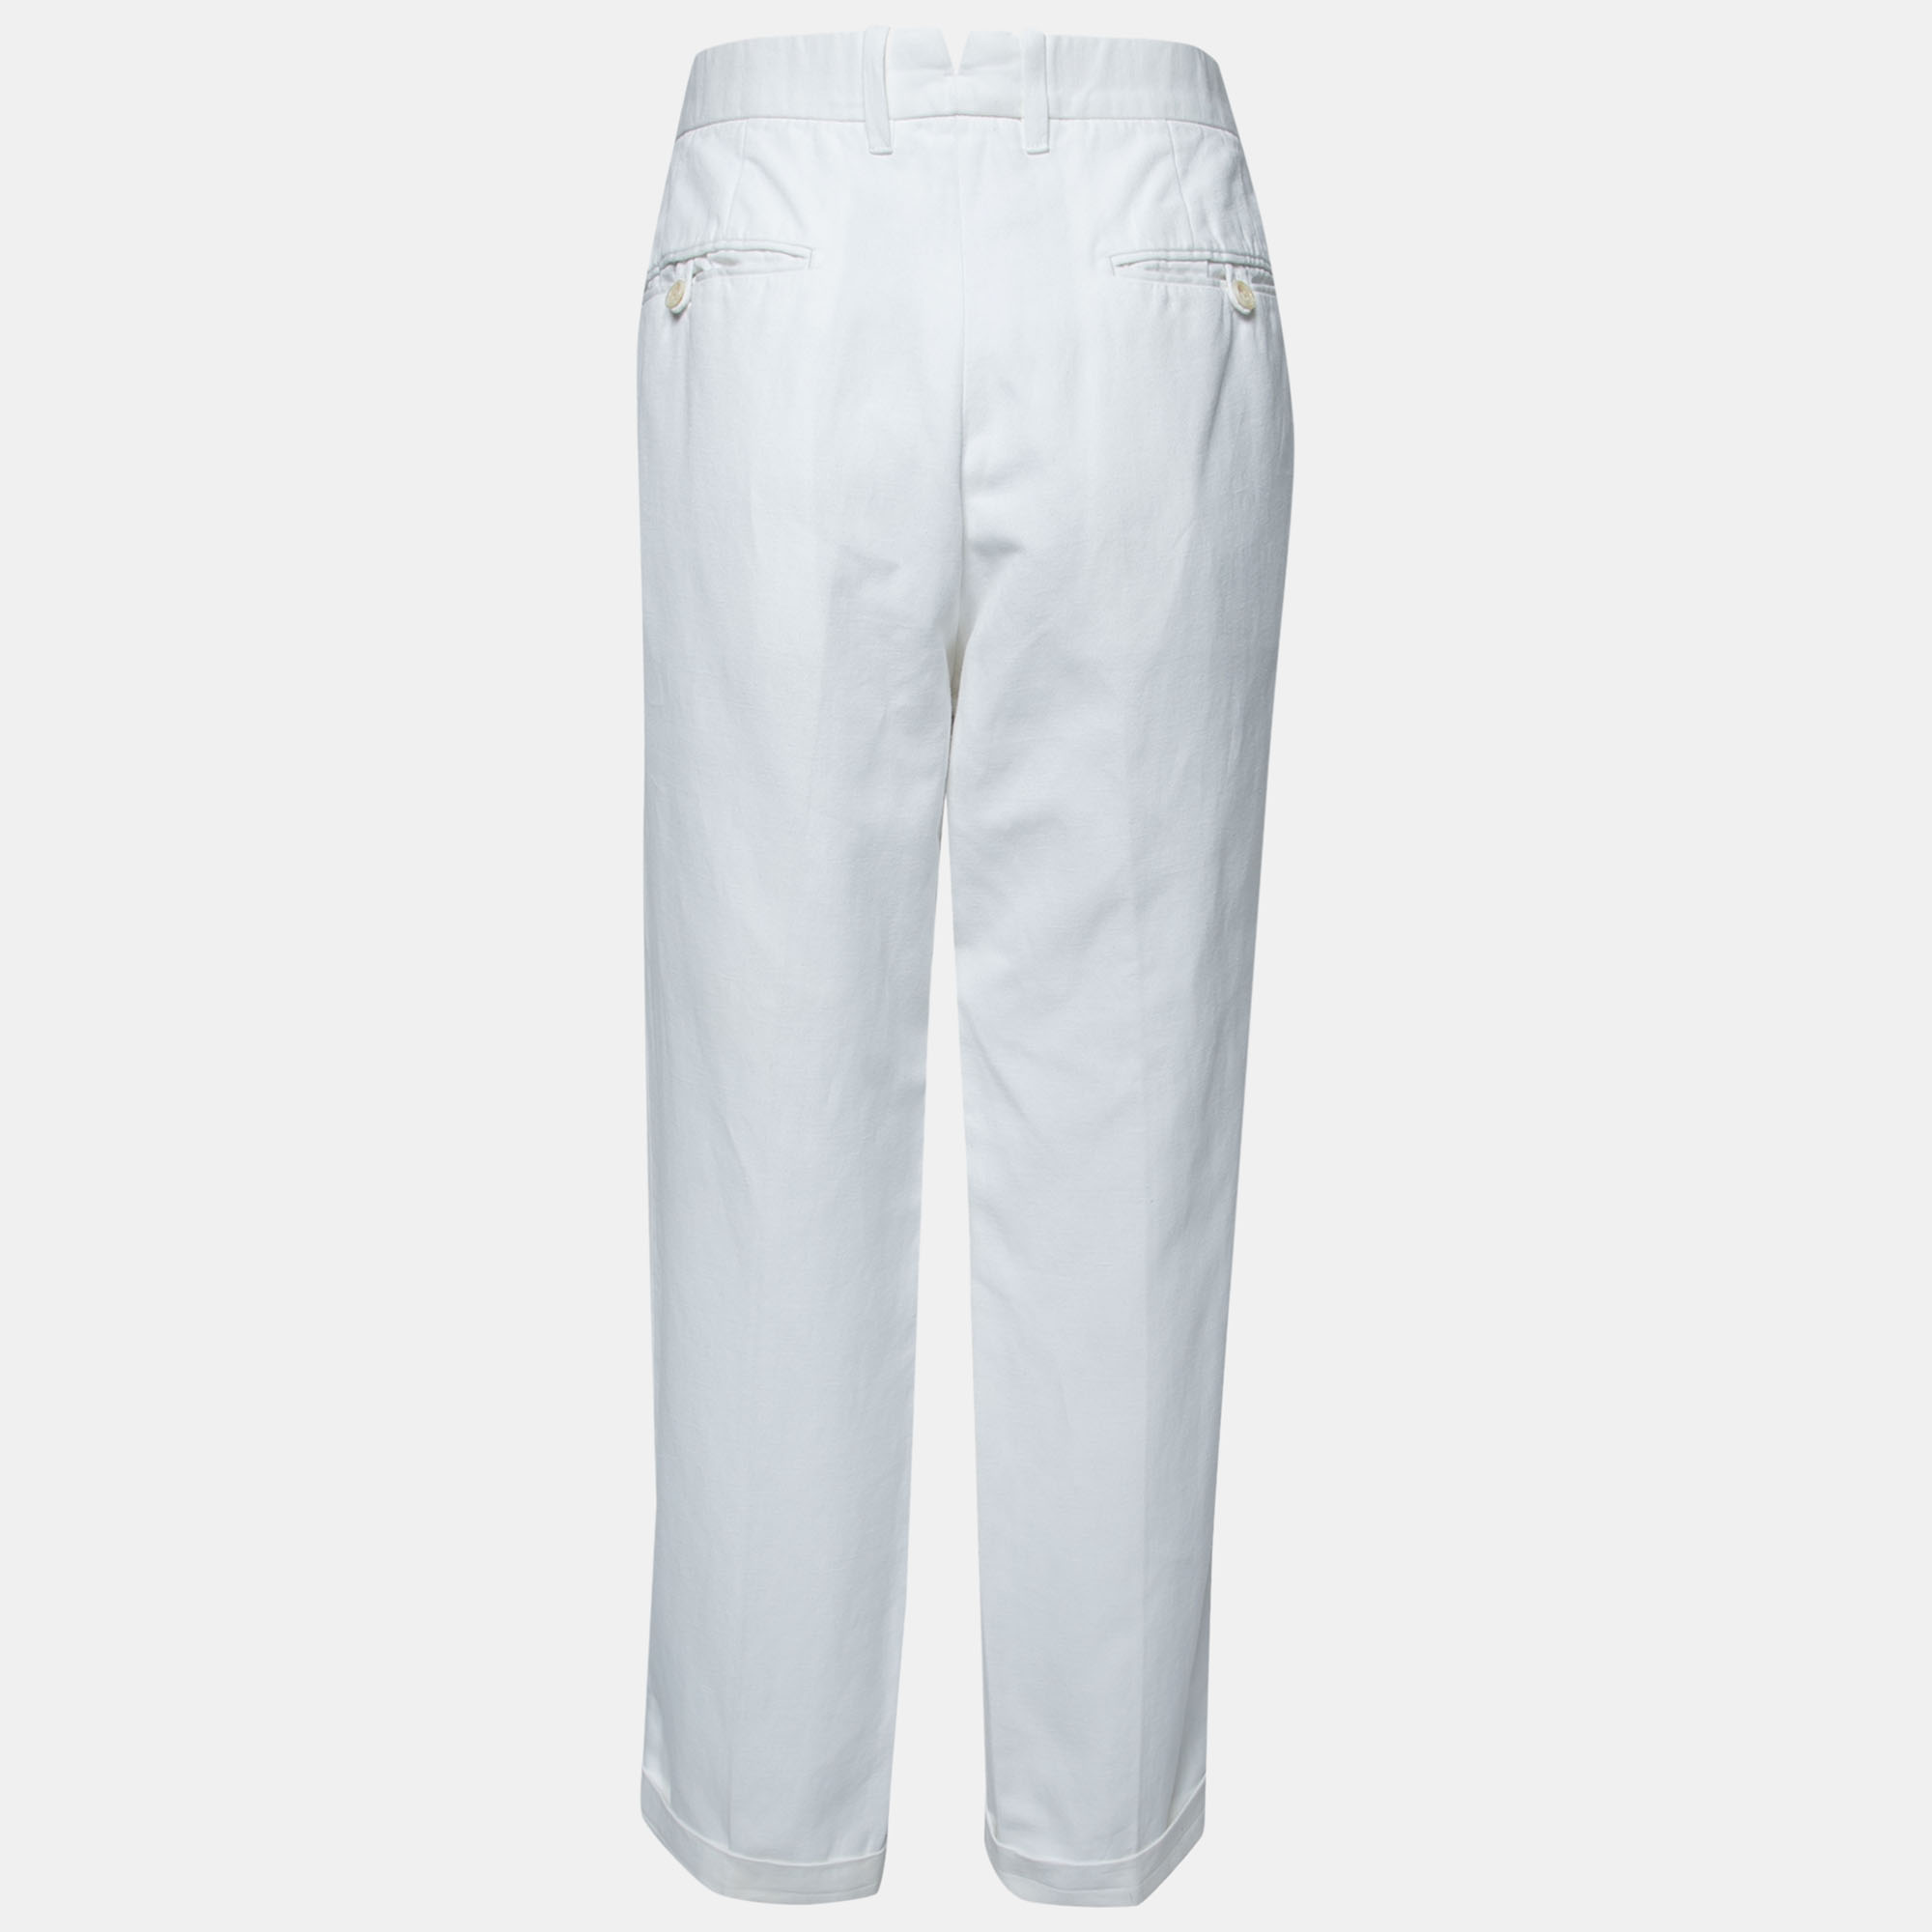 

Tom Ford White Cotton Blend Trousers  Waist 36